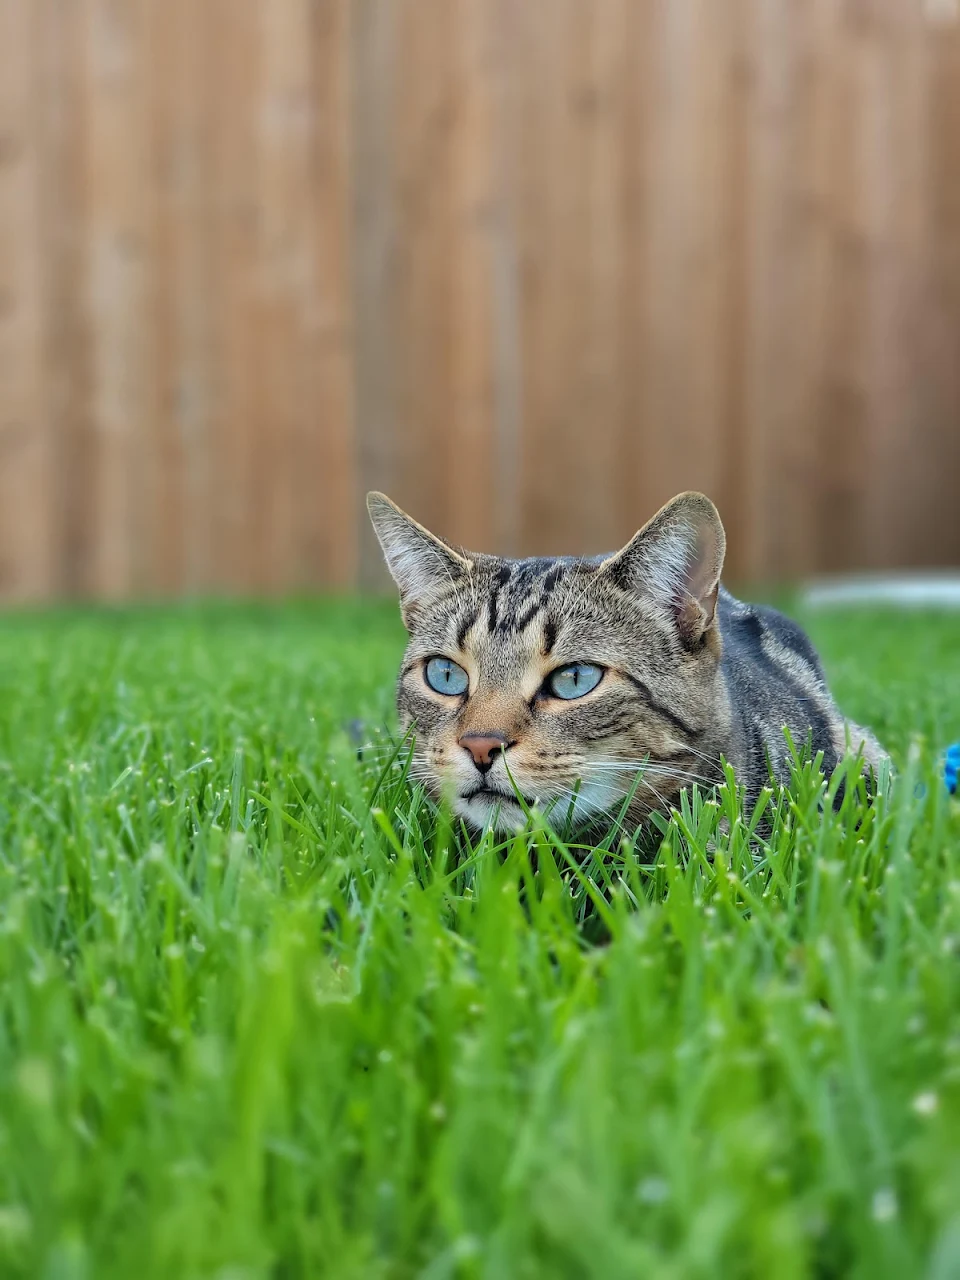 stalking kitty in the grass